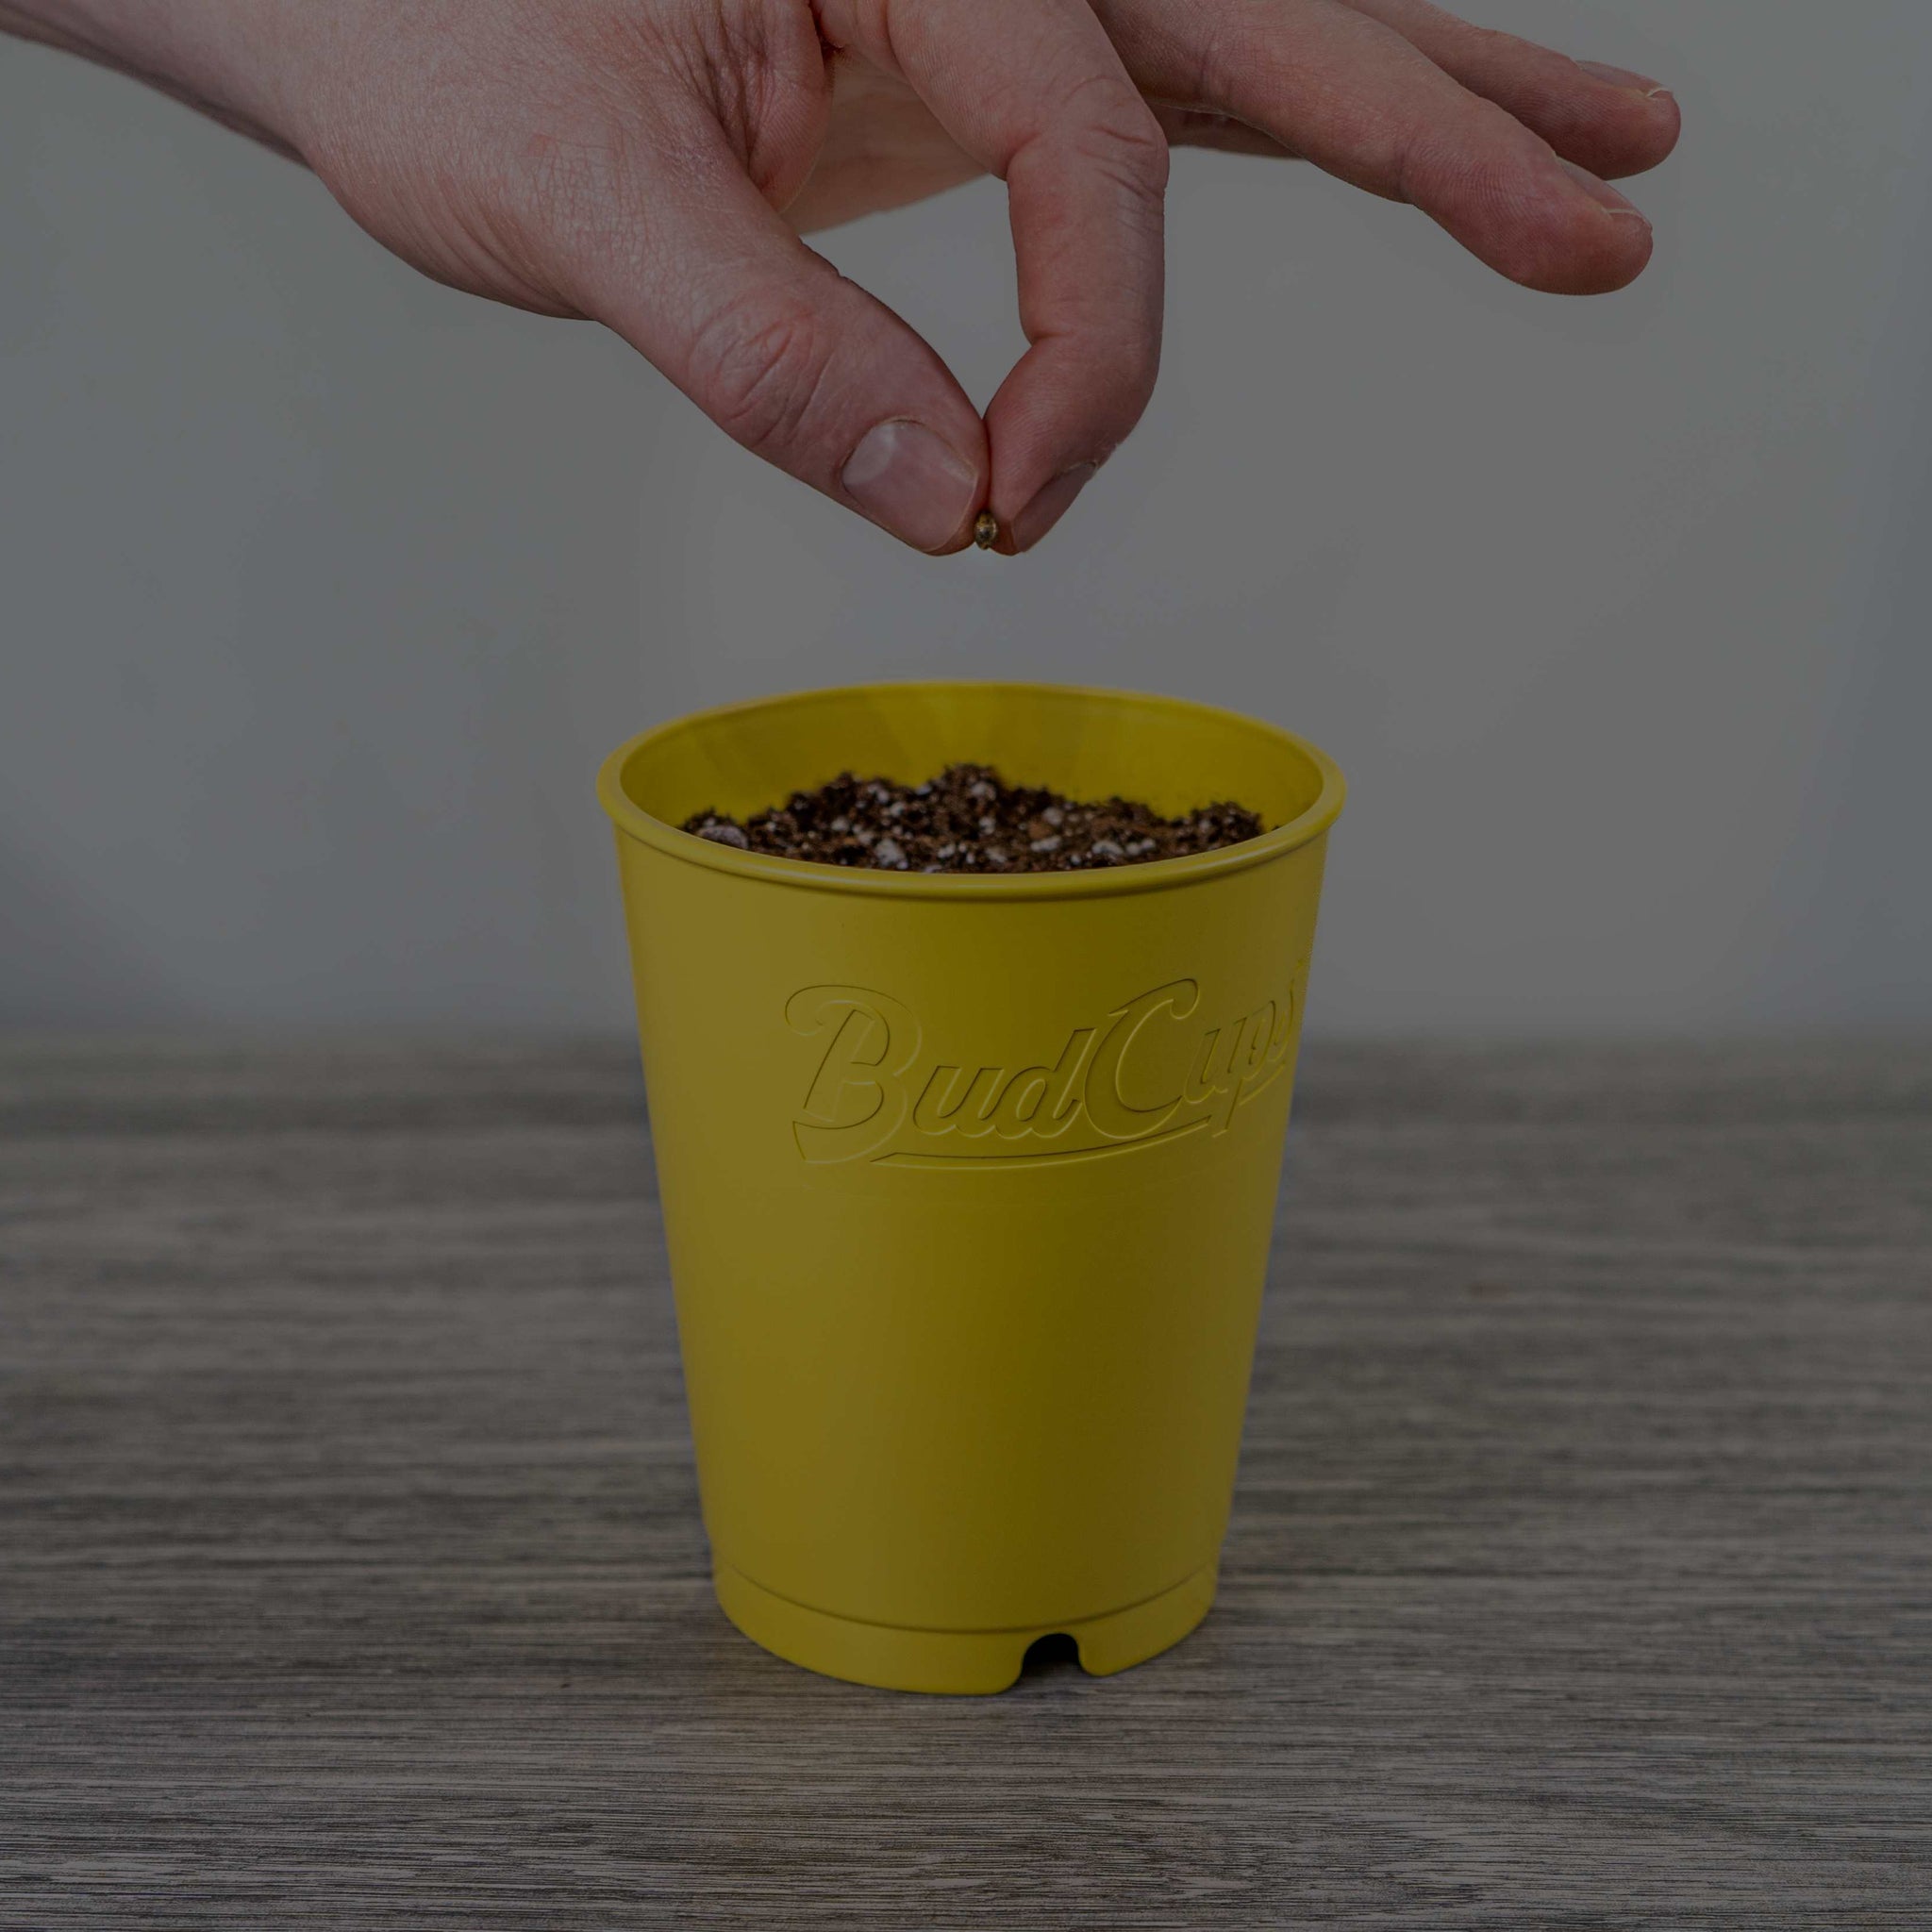 A person's hand dropping a seed into a yellow pot labeled 'BudCups' filled with dark soil, set against a grey background.